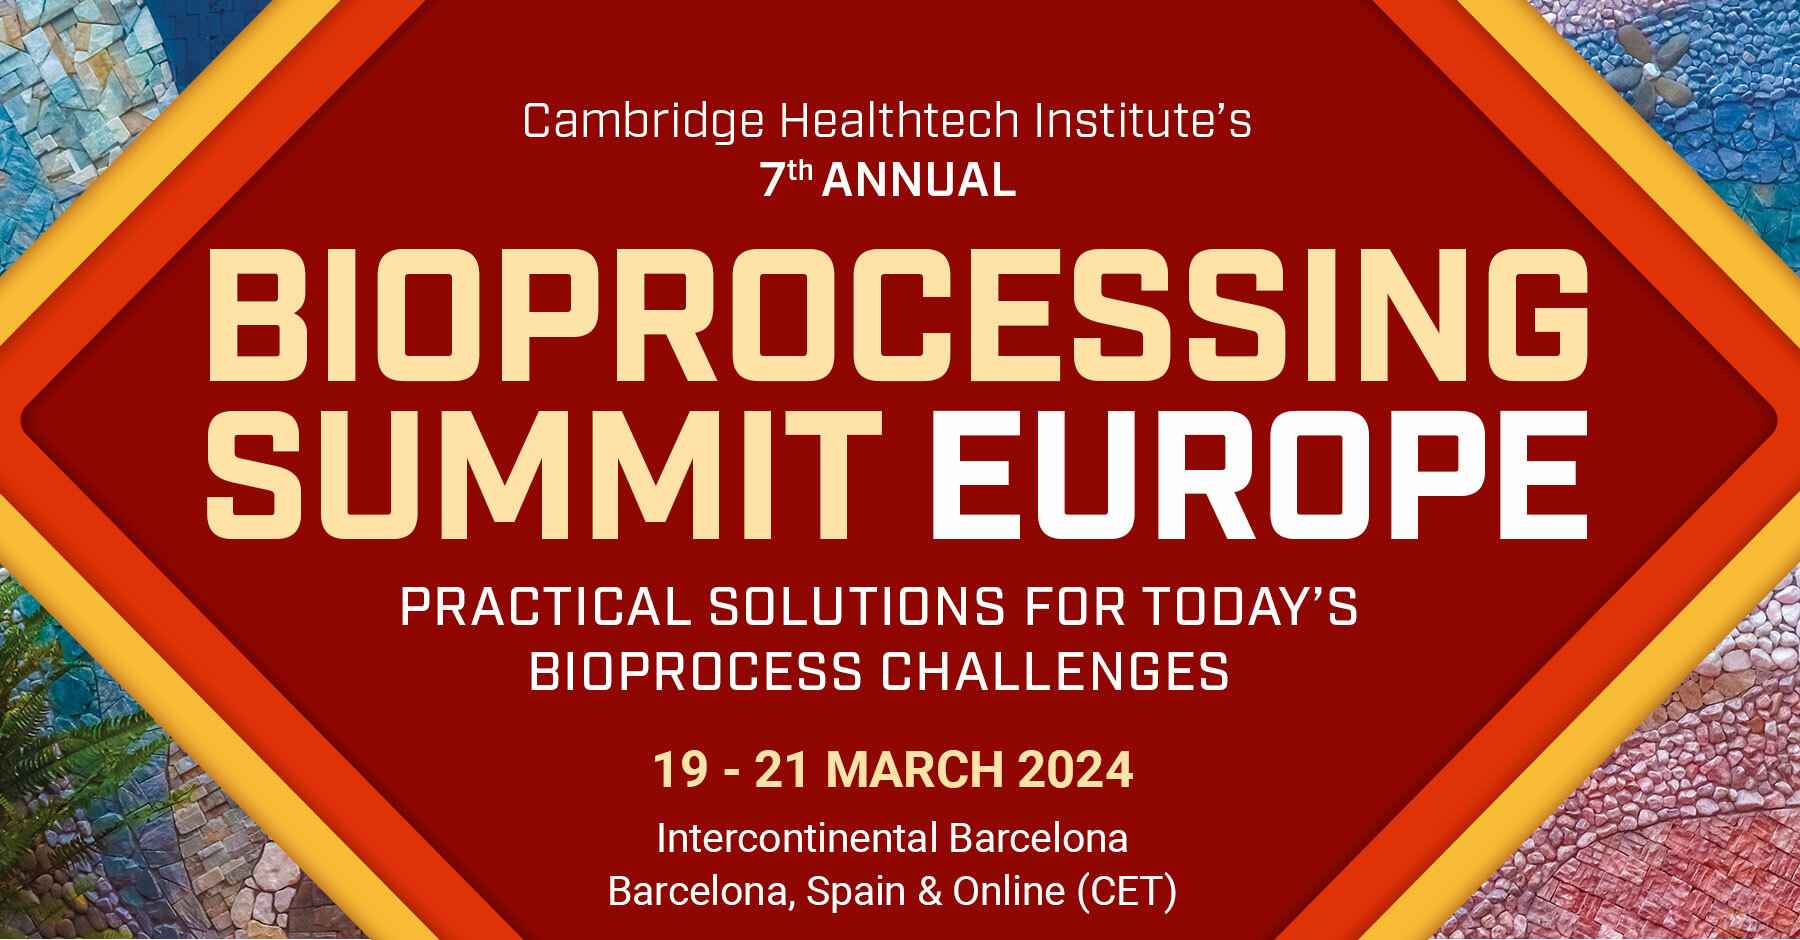 Bioprocessing Summit Europe (Mar 2024), Barcelona Spain Conference